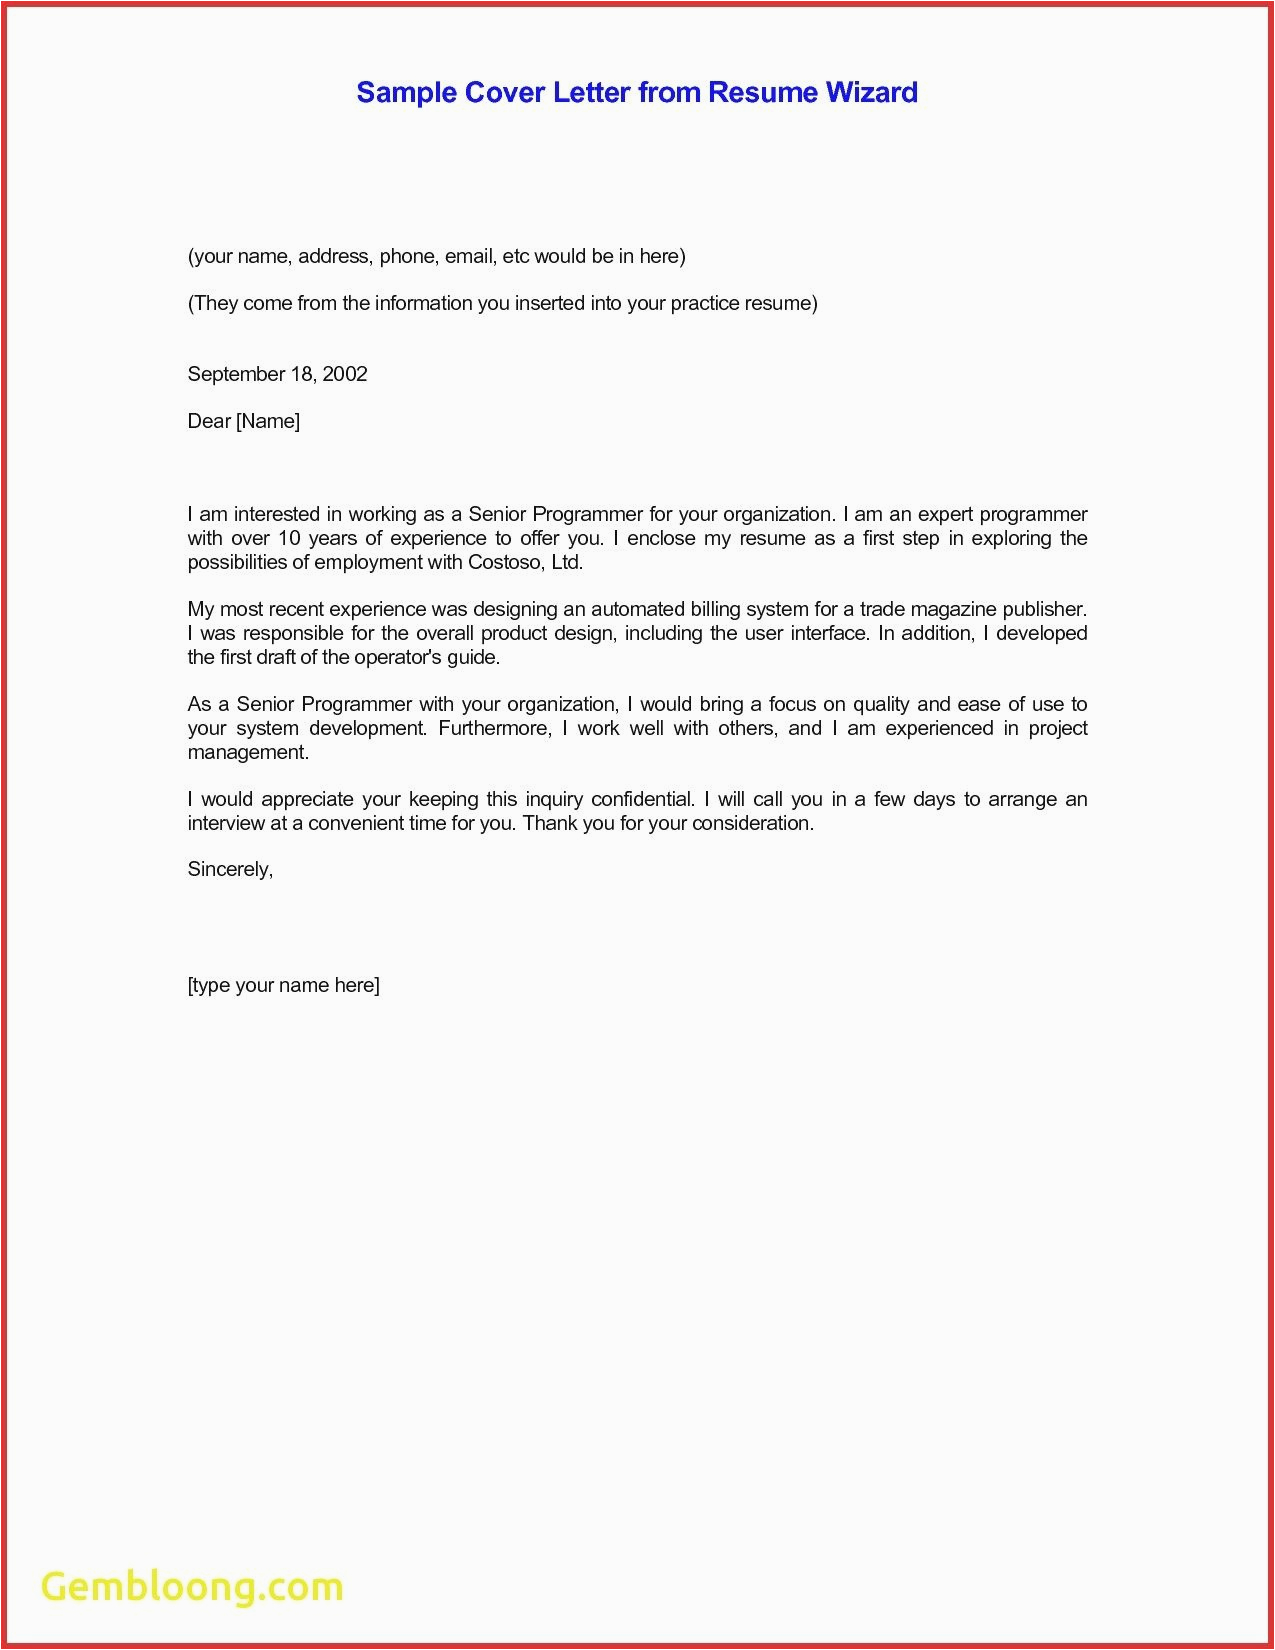 Email Cover Letter and Resume Sample Email Cv Cover Letter Template Resume format